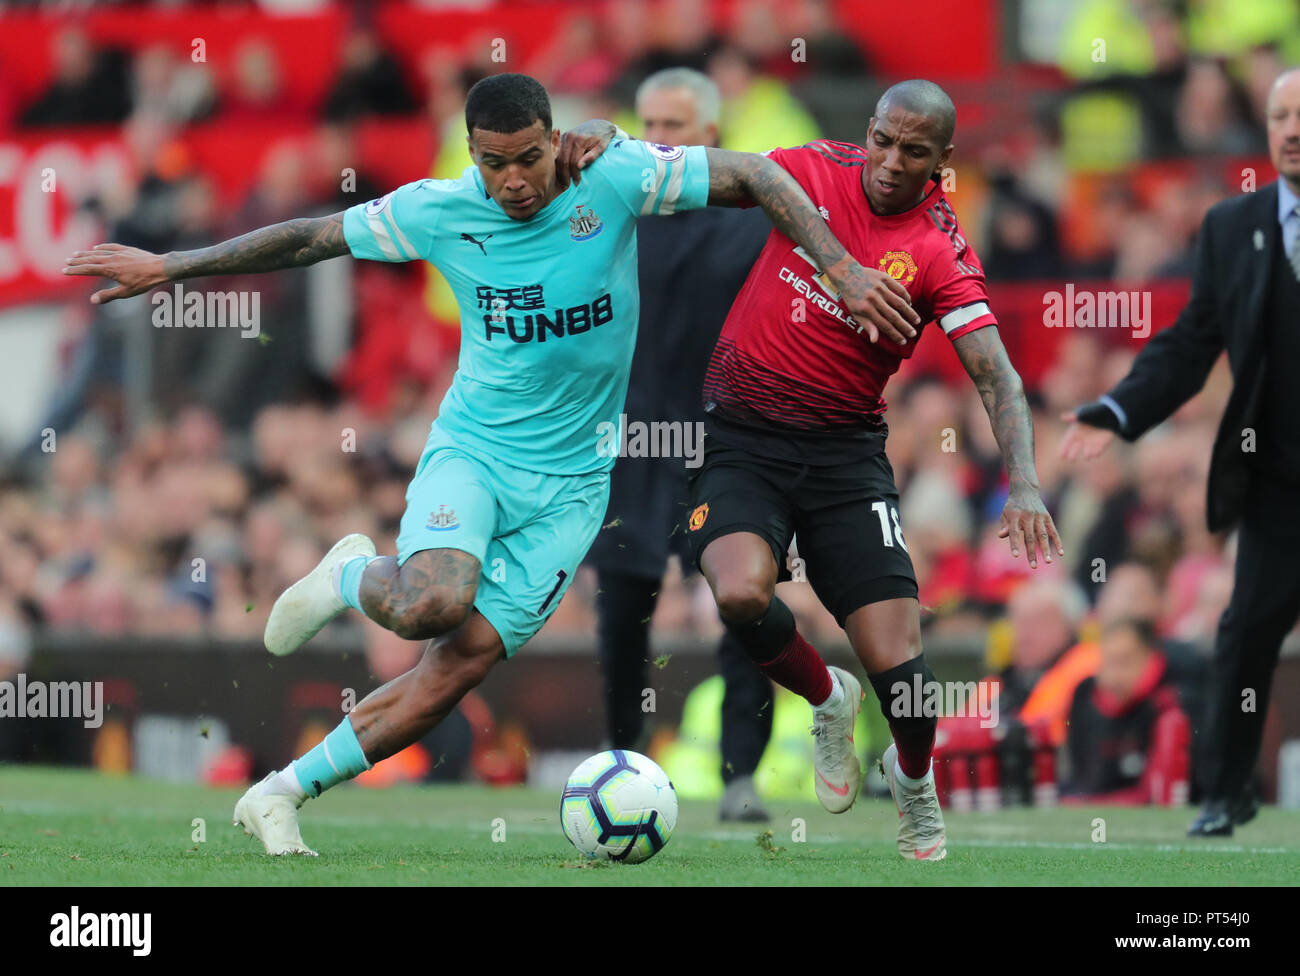 Kenedy & Ashley Young MANCHESTER UNITED FC V NEWCASTLE UNITED FC MANCHESTER UNITED FC V NEWCASTLE UNITED FC 06 October 2018 GBD12347 PREMIER LEAGUE 06/10/18 OLD TRAFFORD, MANCHESTER STRICTLY EDITORIAL USE ONLY. If The Player/Players Depicted In This Image Is/Are Playing For An English Club Or The England National Team. Then This Image May Only Be Used For Editorial Purposes. No Commercial Use. The Following Usages Are Also Restricted EVEN IF IN AN EDITORIAL CONTEXT: Use in conjuction with, or part of, any unauthorized audio, video, data, fixture lists, club/league logos, Betti Stock Photo